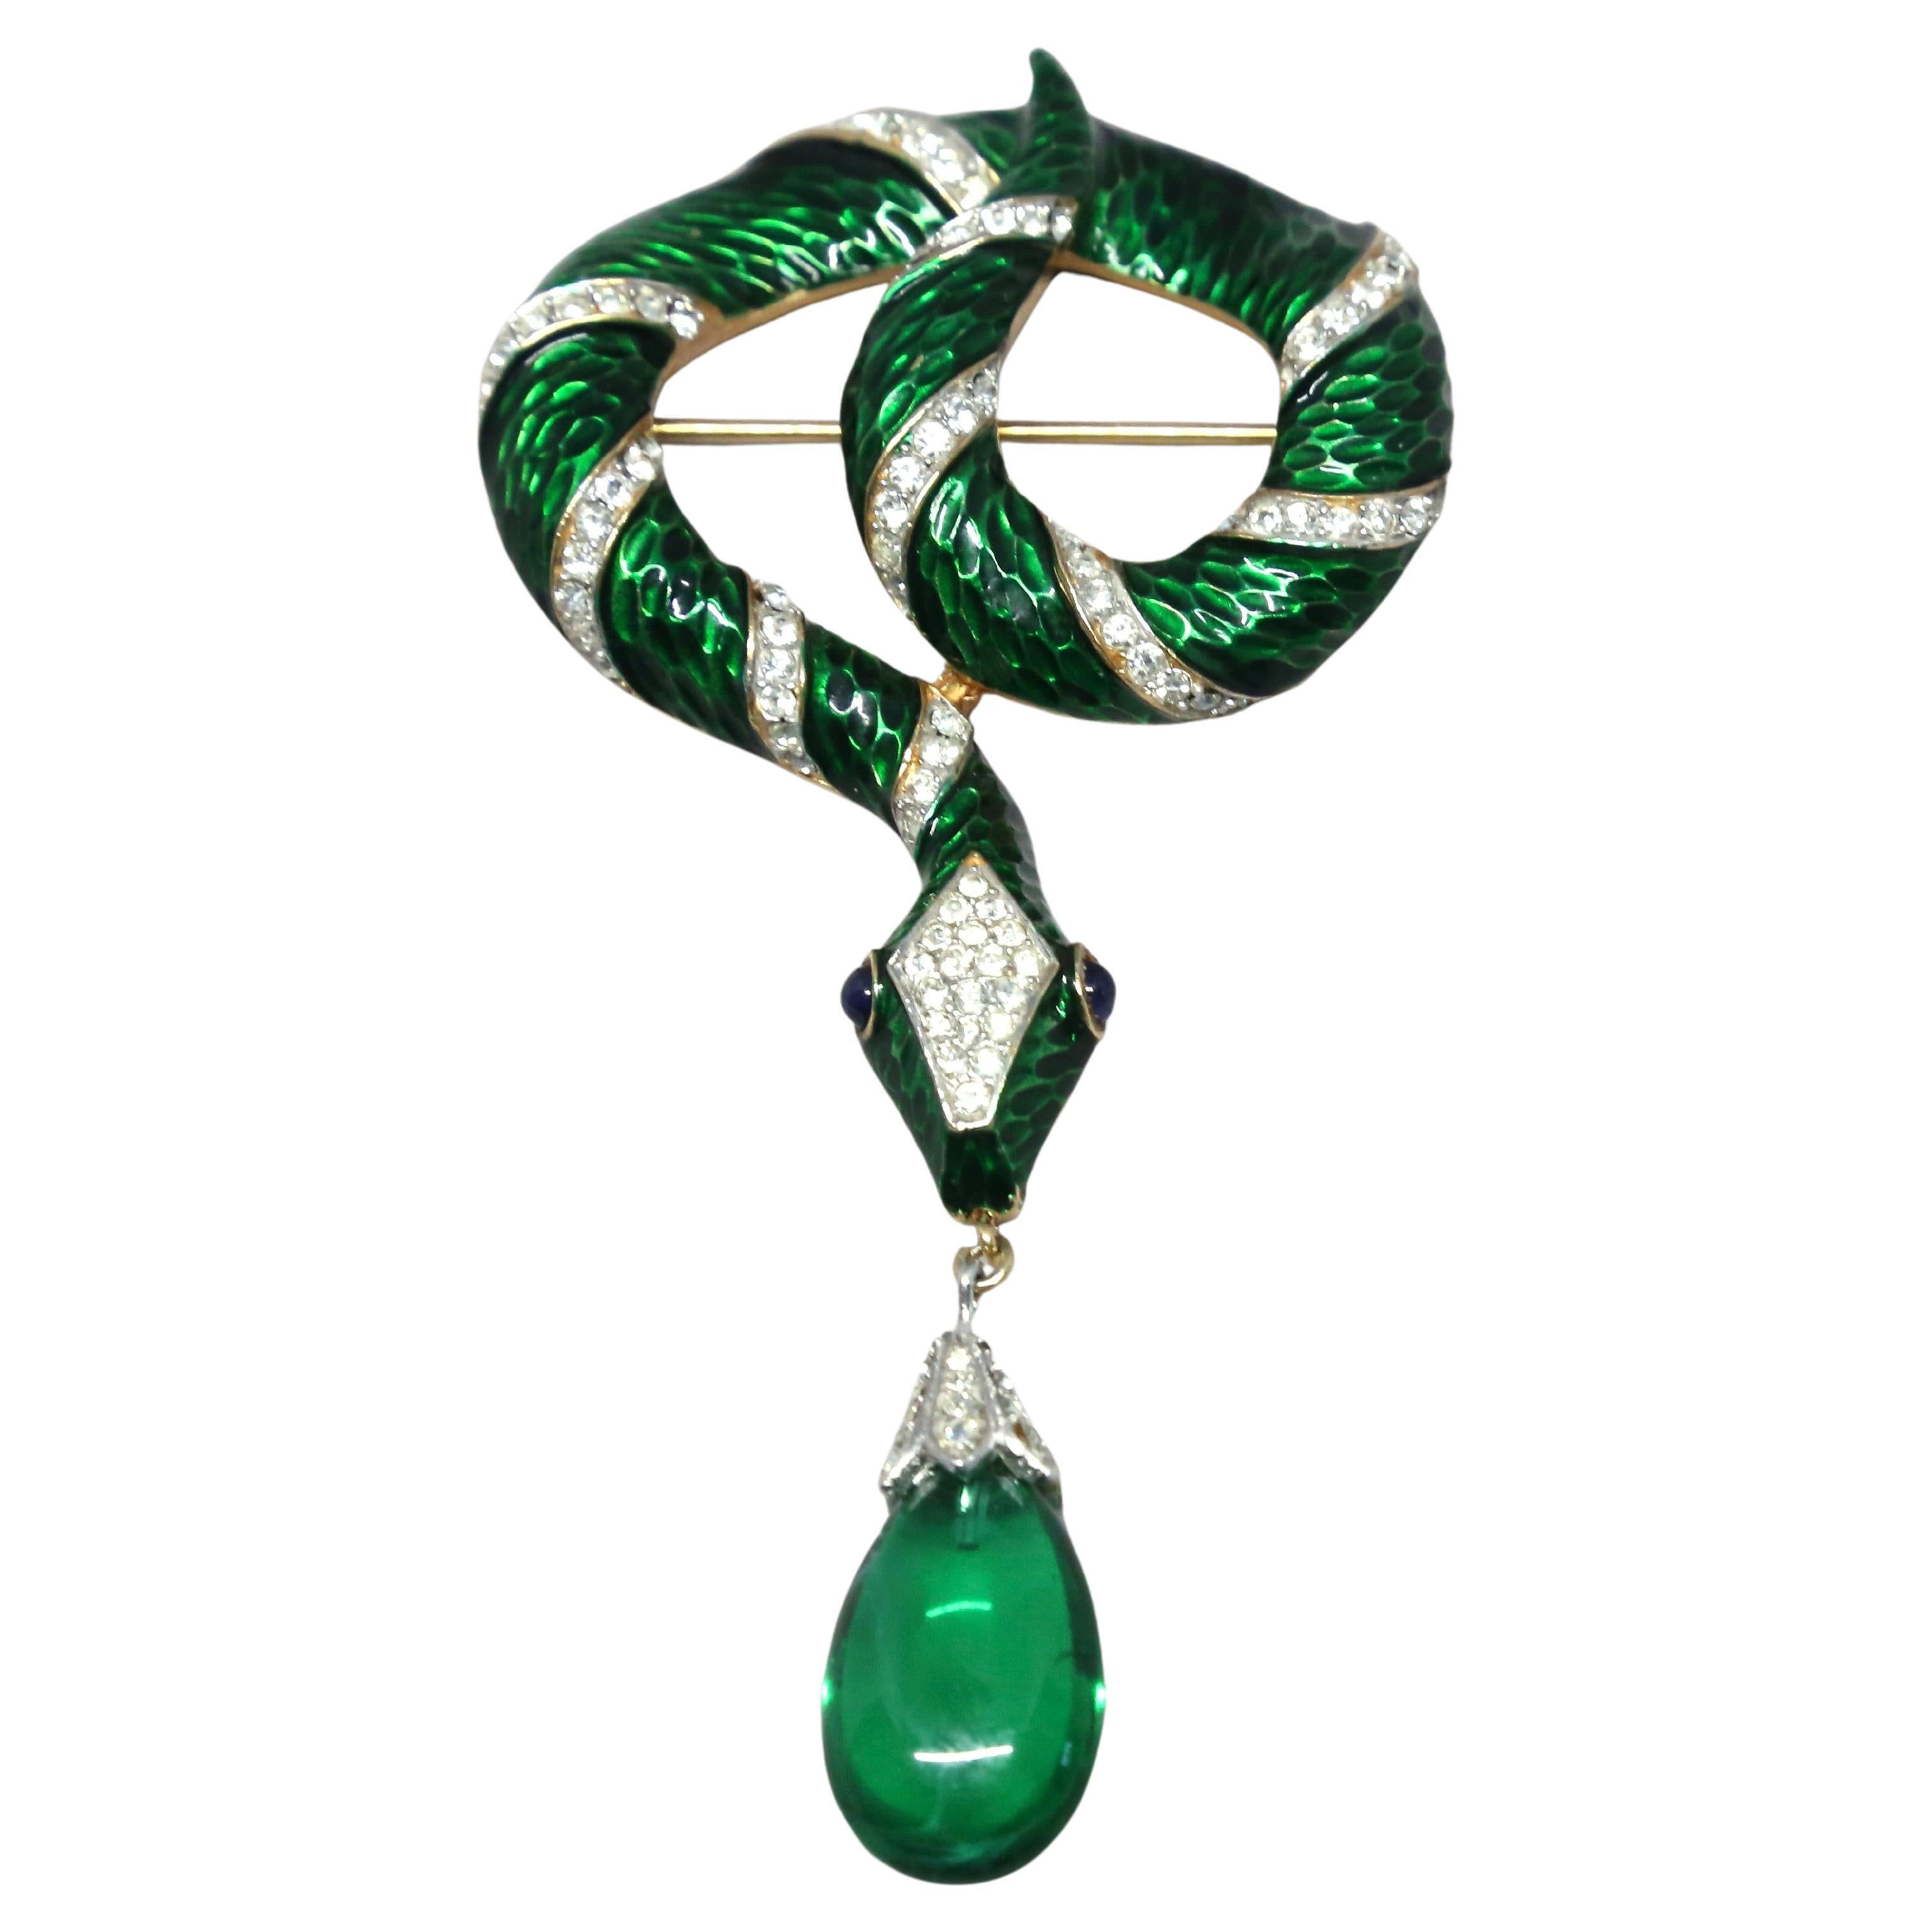 Very rare, 'Garden Of Eden' serpent brooch with green enamel, pave rhinestones, blue glass eyes and dangling emerald crystal pendant designed by Alfred Philippe for Trifari dating to the 1960's. Exactly as seen in original Trifari ad. Brooch has